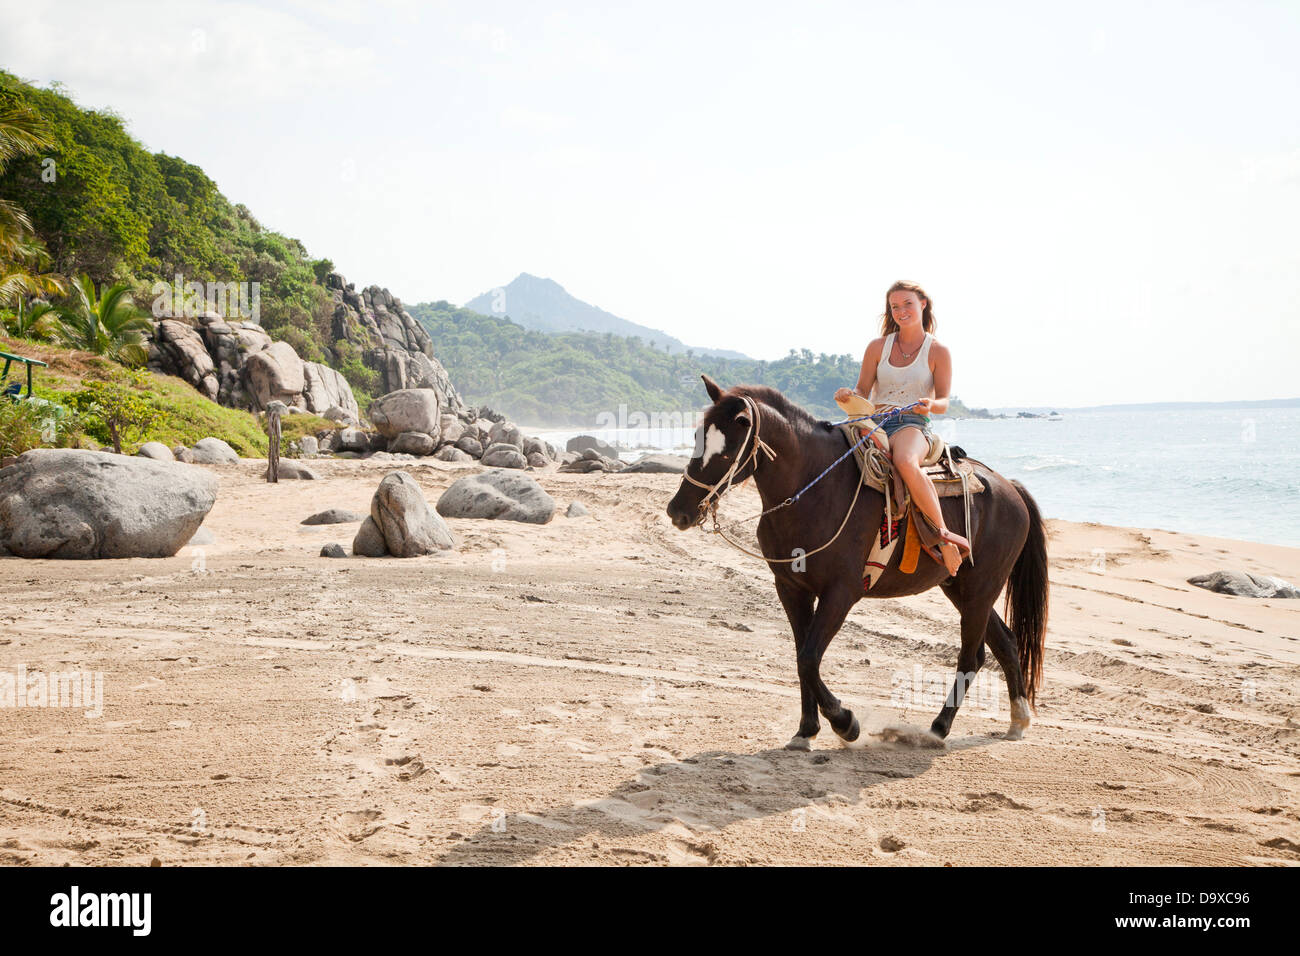 Young woman riding horse on beach Stock Photo